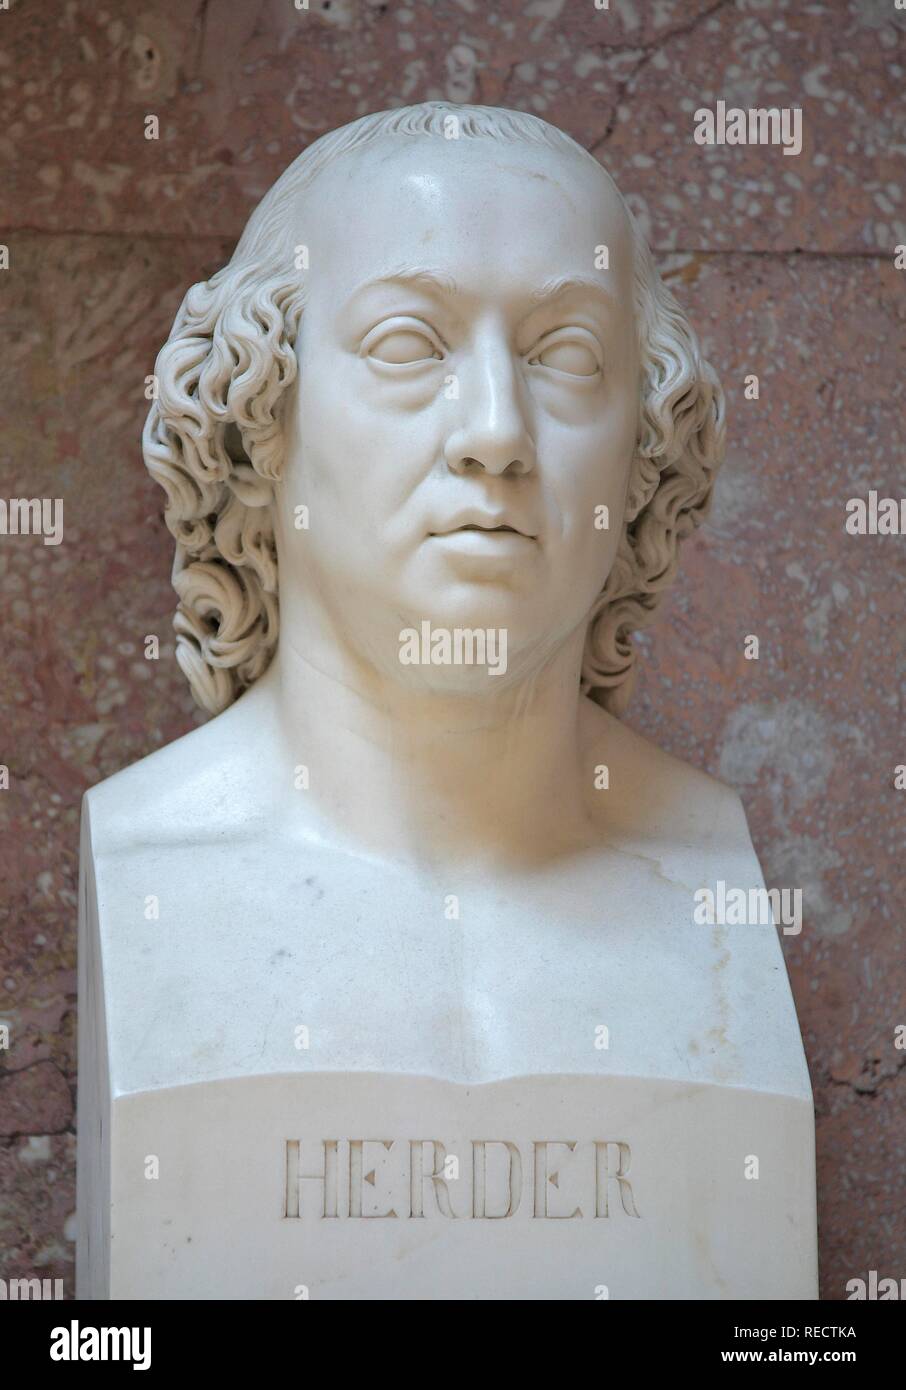 Bust of Johann Gottfried von Herder, German poet, critic and theologian of the German Classic Period Stock Photo